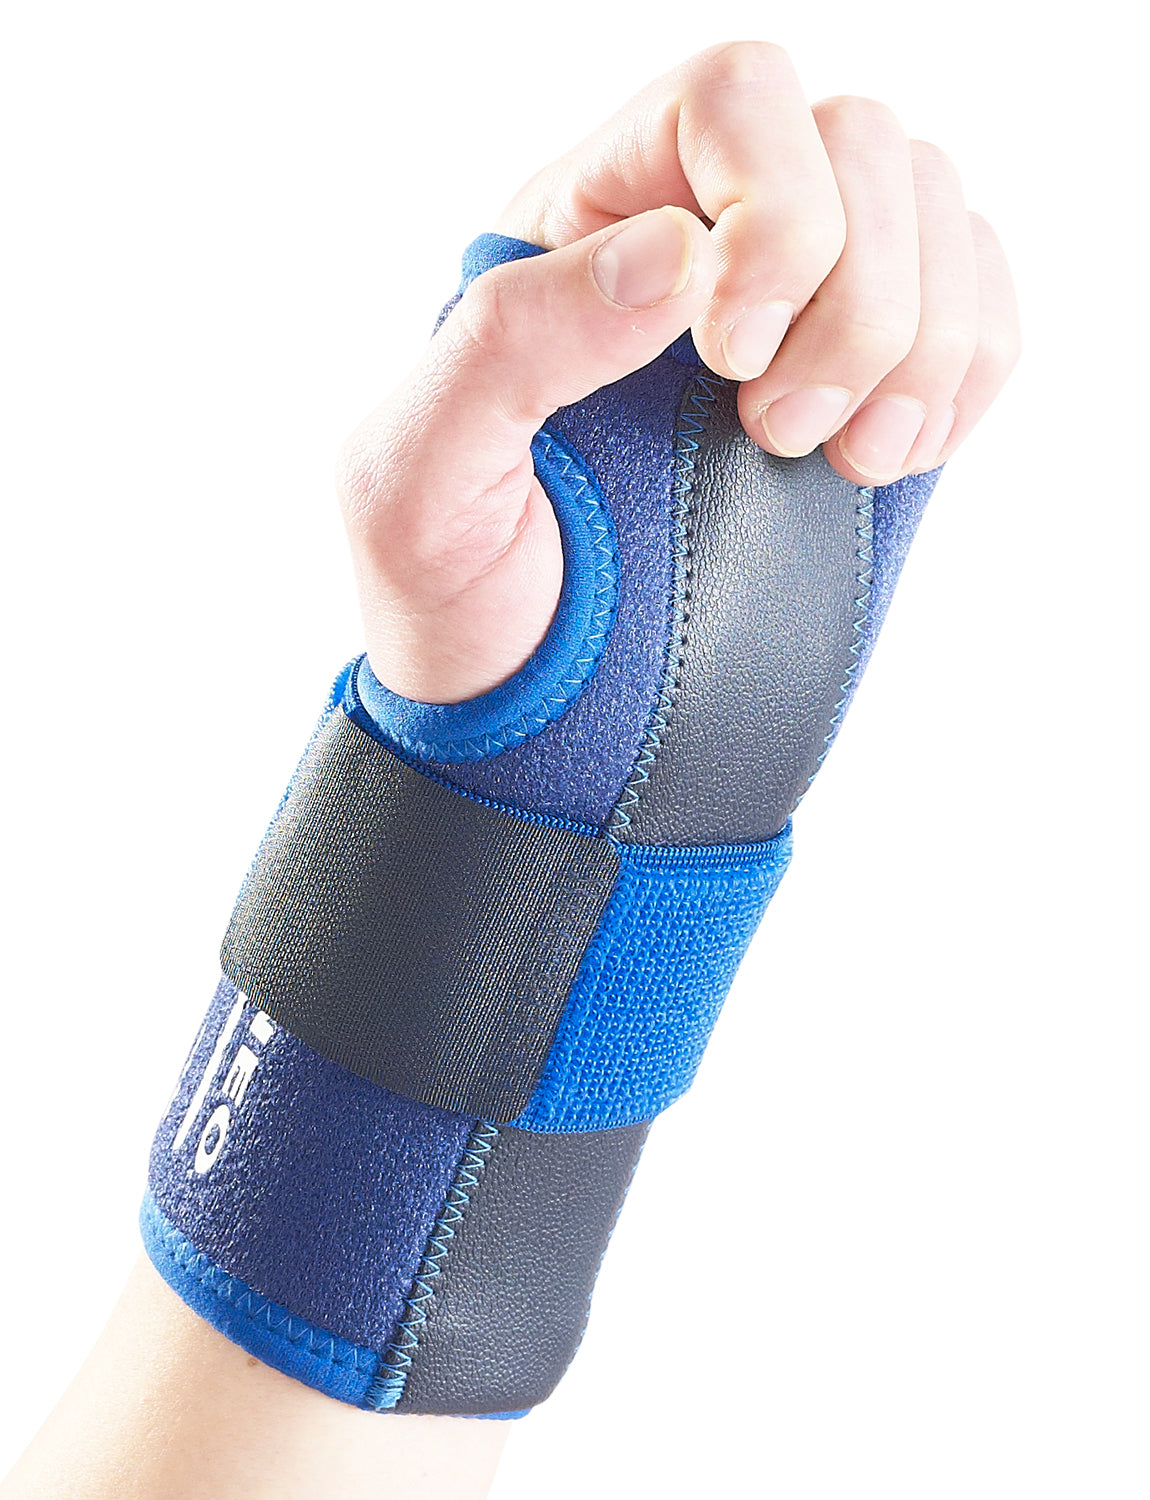 Grip's Foream Brace  Fracture and Early Cast Removal Braces